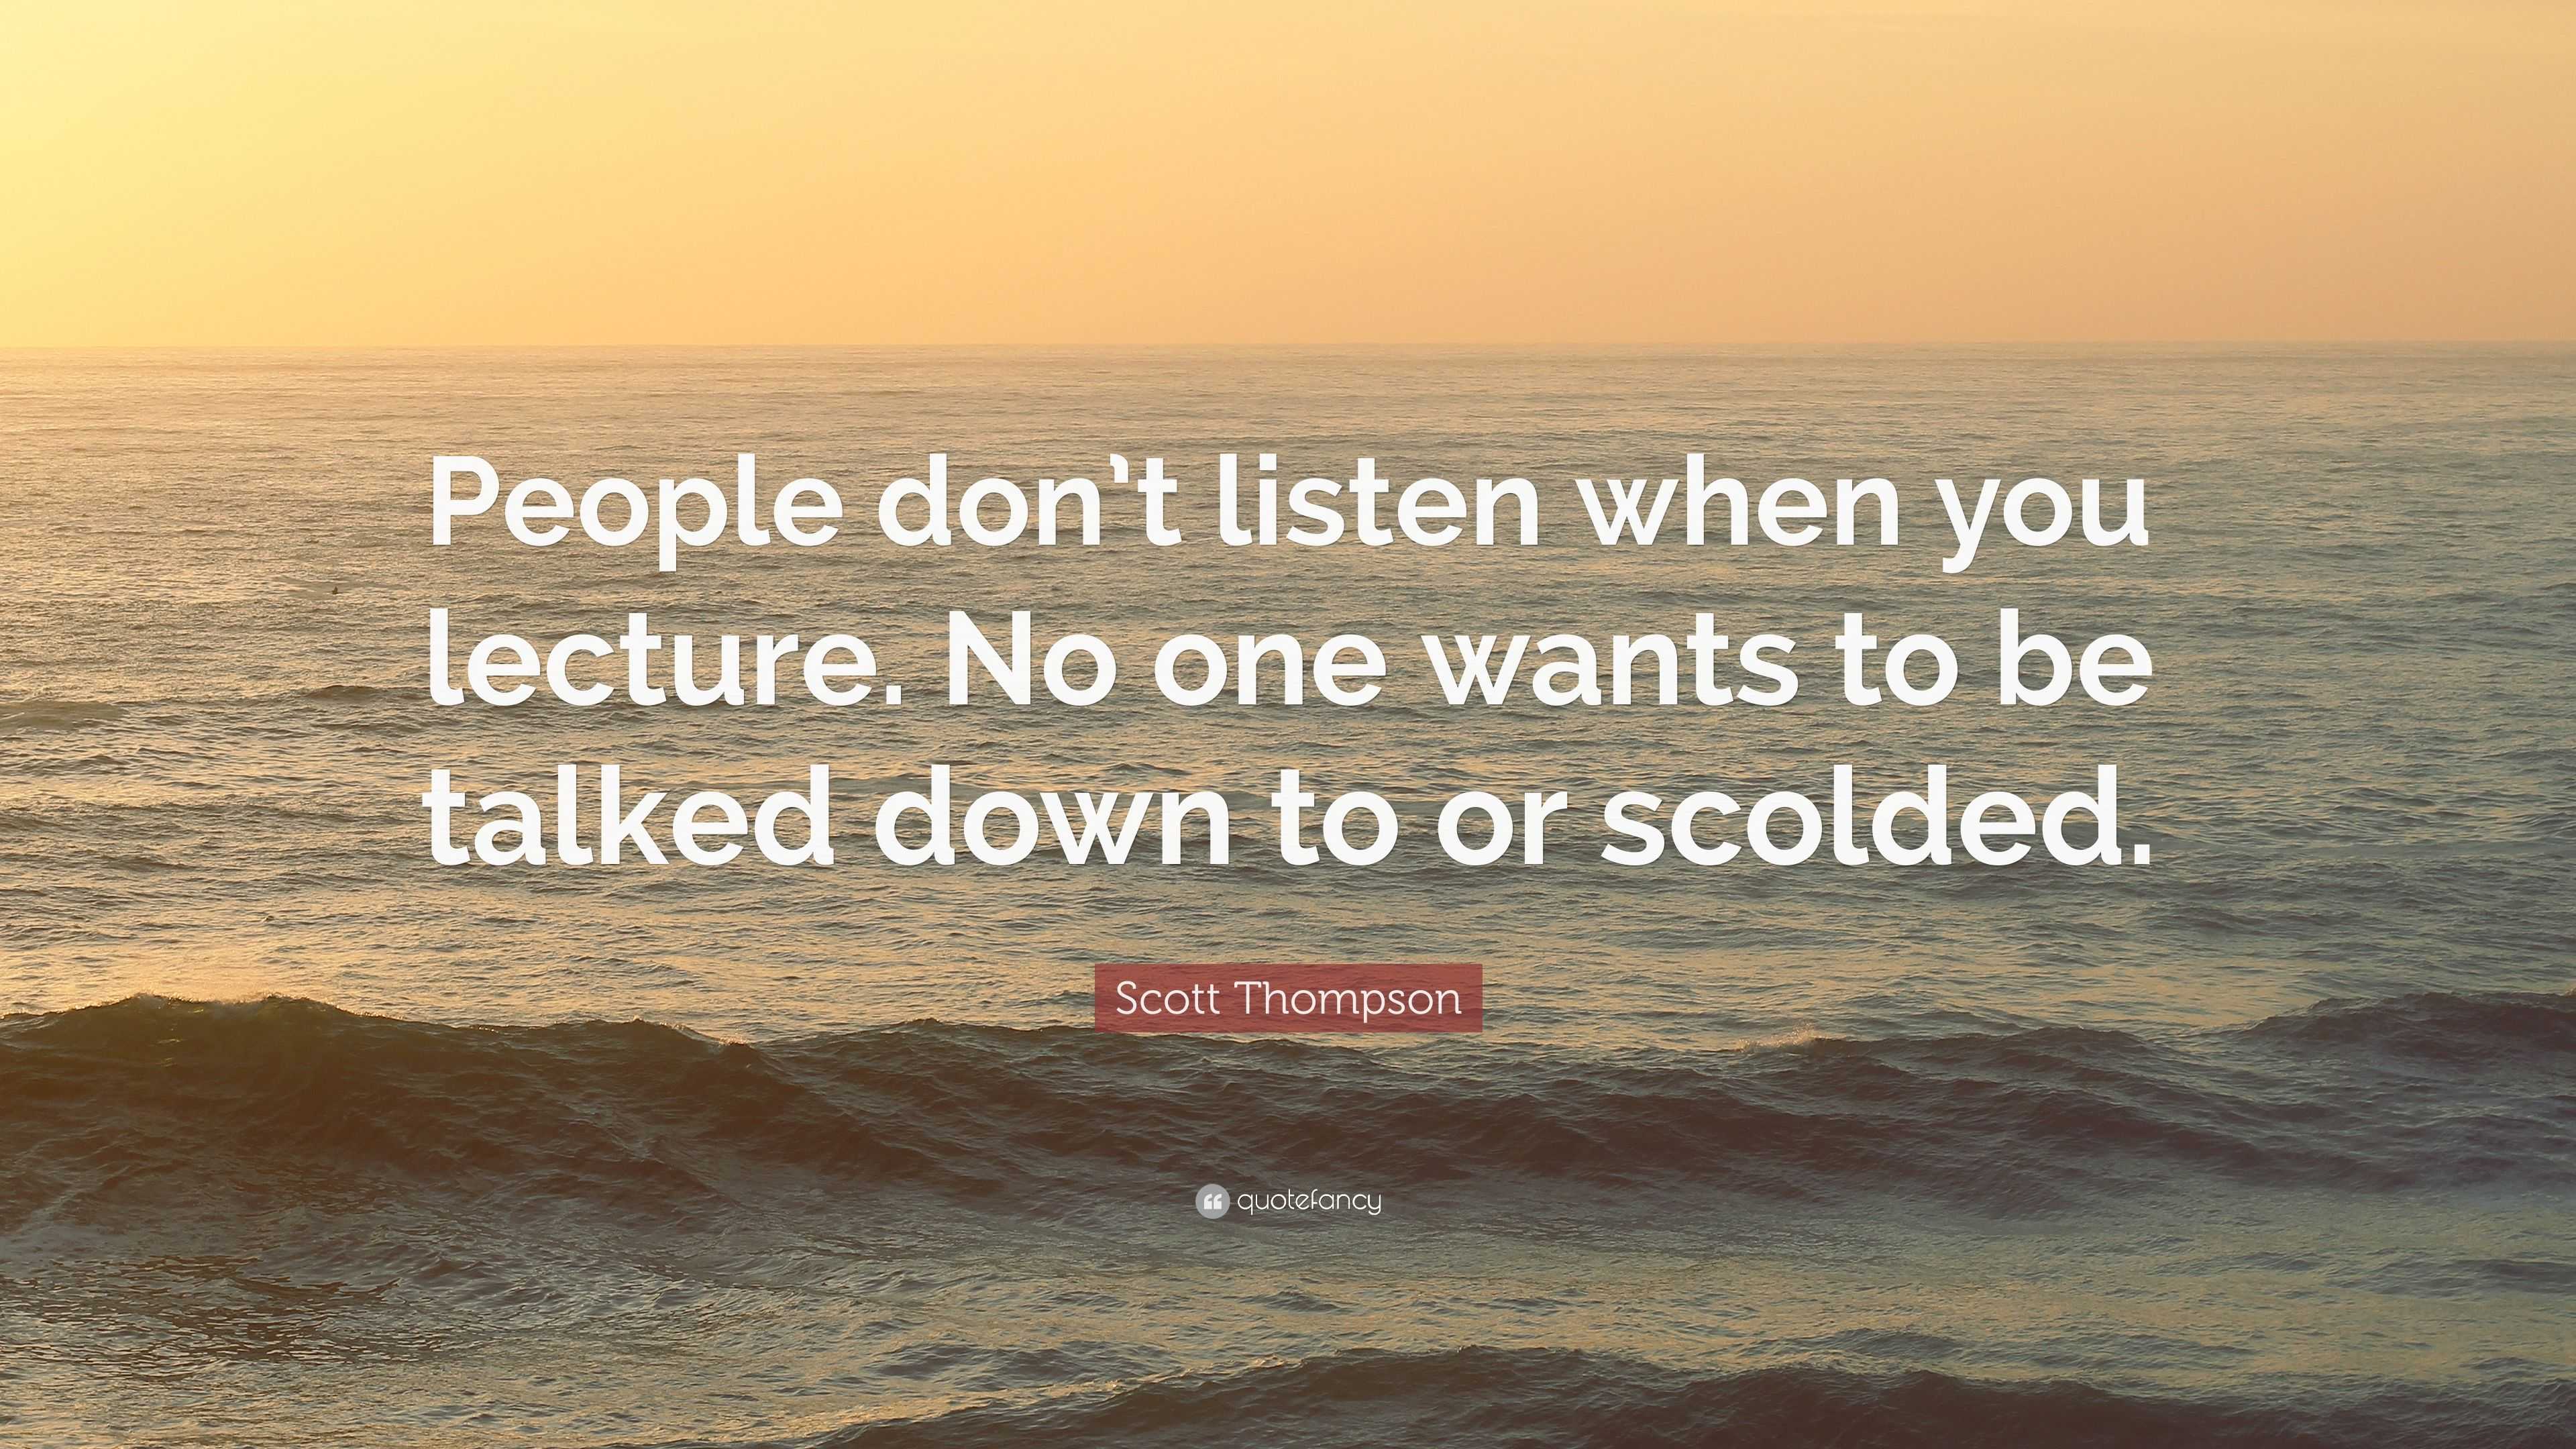 Scott Thompson Quote: “People don’t listen when you lecture. No one ...